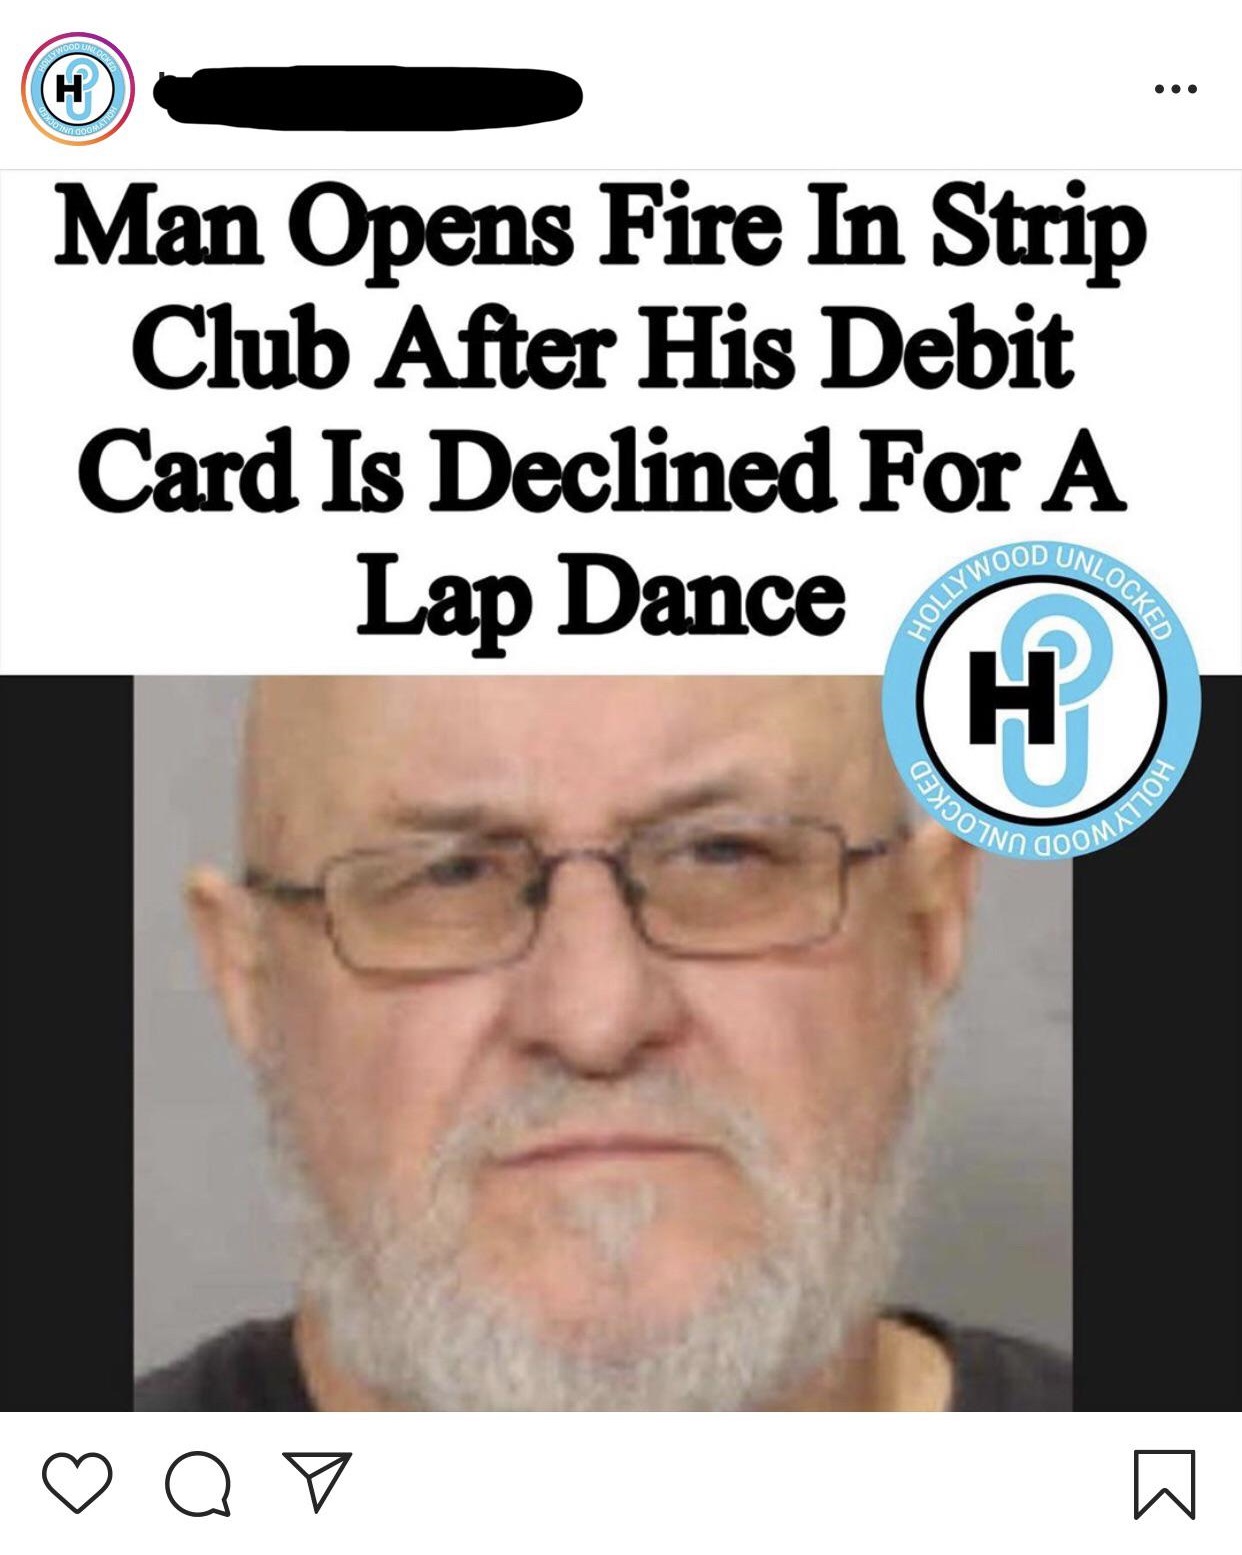 photo caption - Man Opens Fire In Strip Club After His Debit Card Is Declined For A Lap Dance Wood Un Locked OX0010 Hollyw No Goom Qo